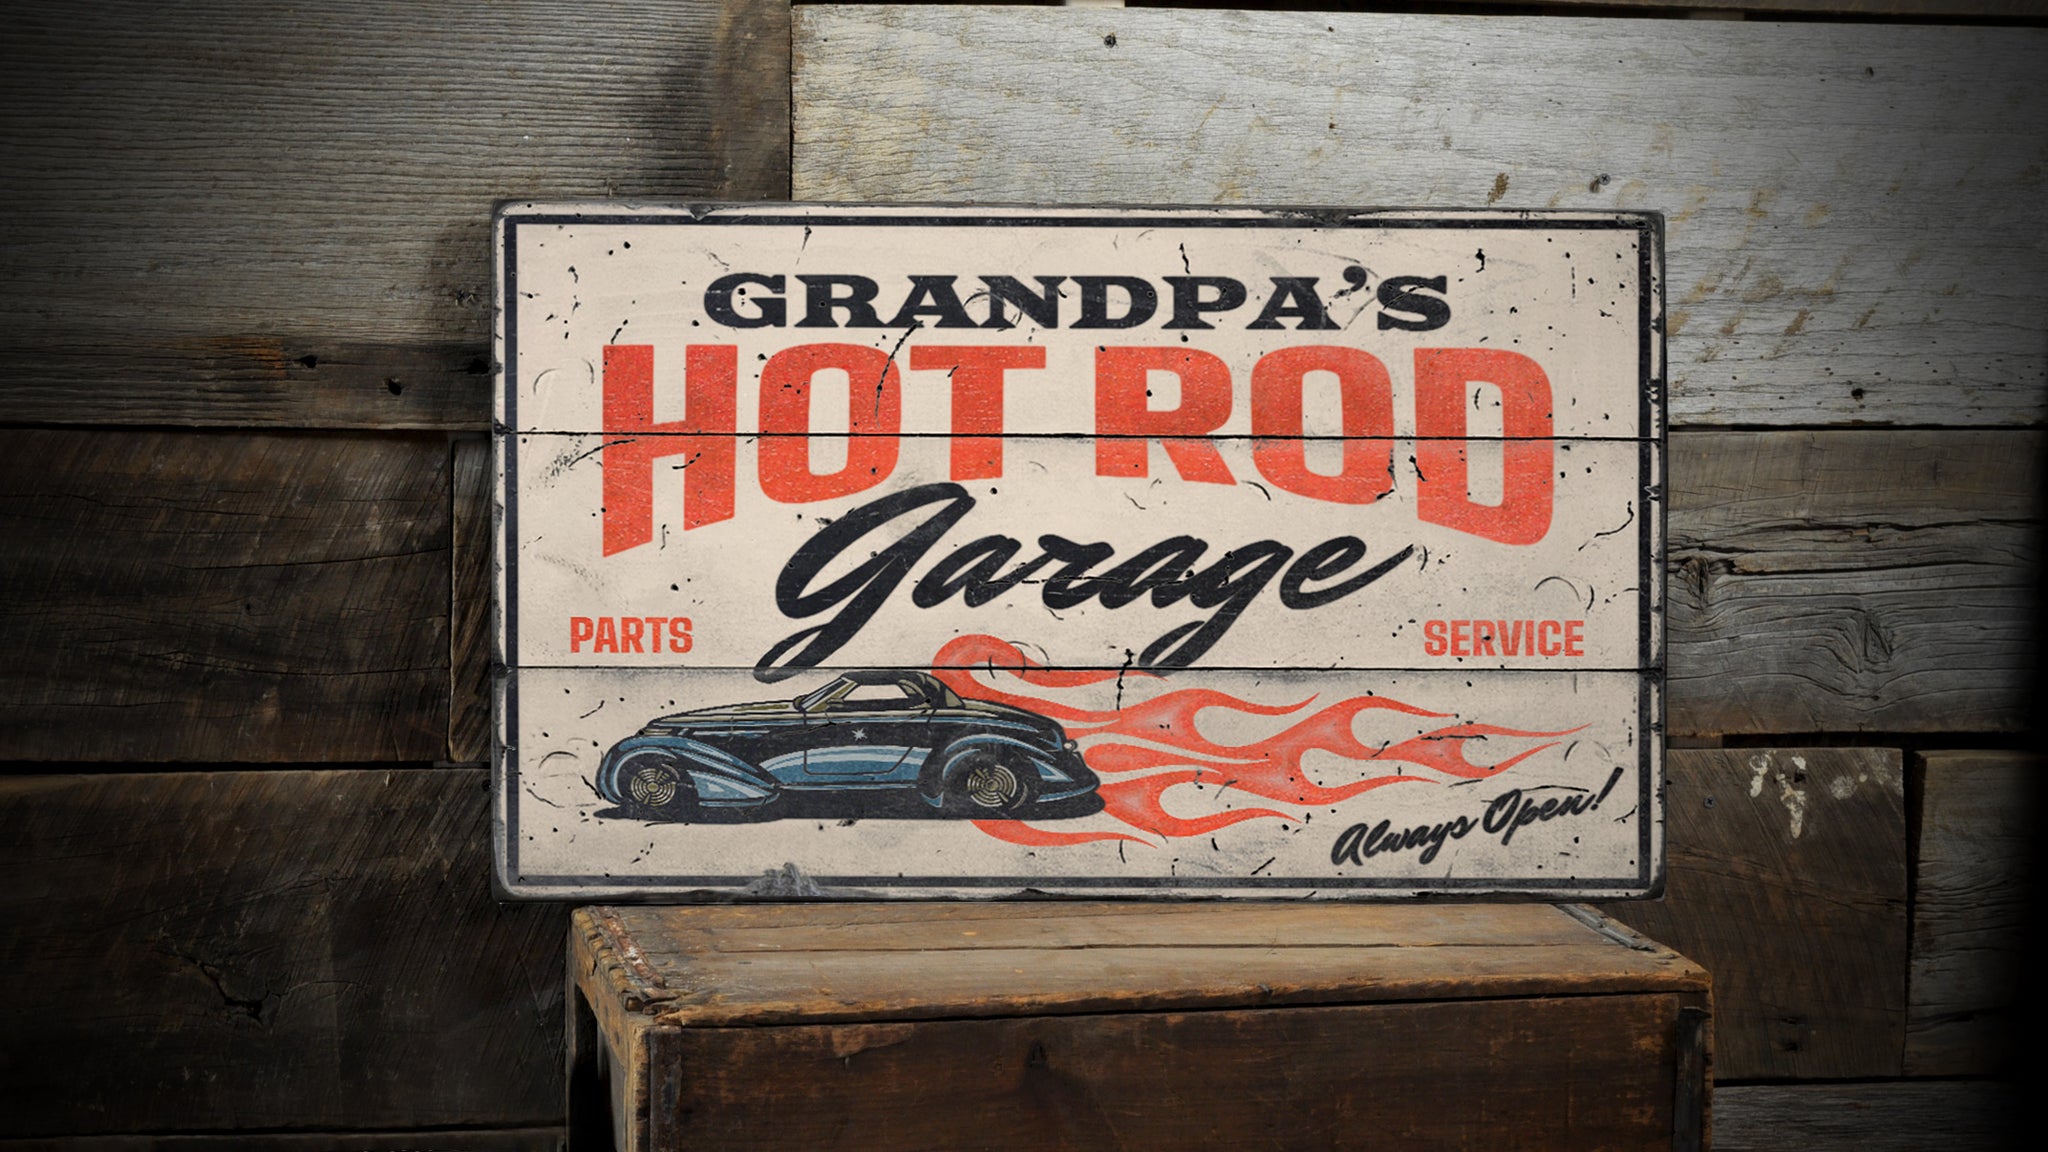 Hot Rod Garage Always Open Parts and Service Rustic Wood Sign